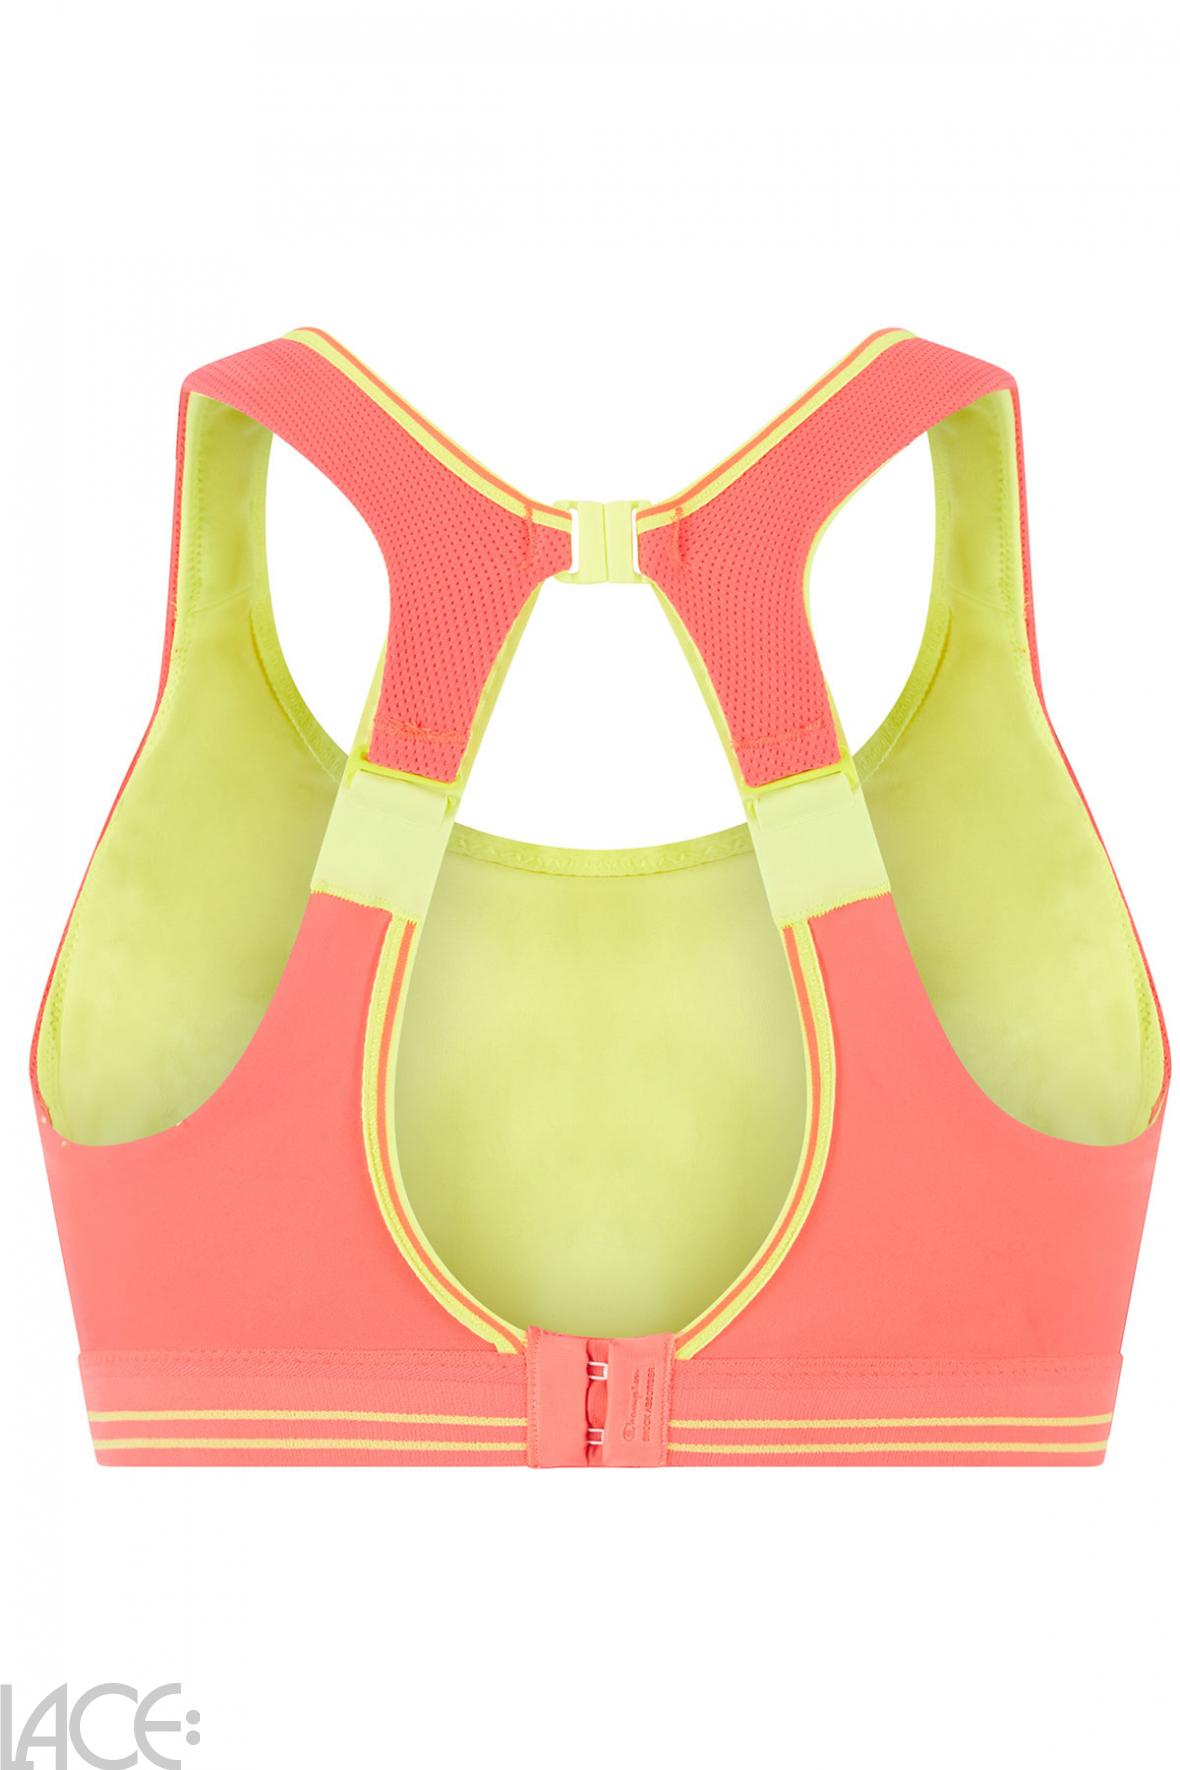 Shock Absorber Ultimate Run Non-wired Sports bra F-I cup NEON –